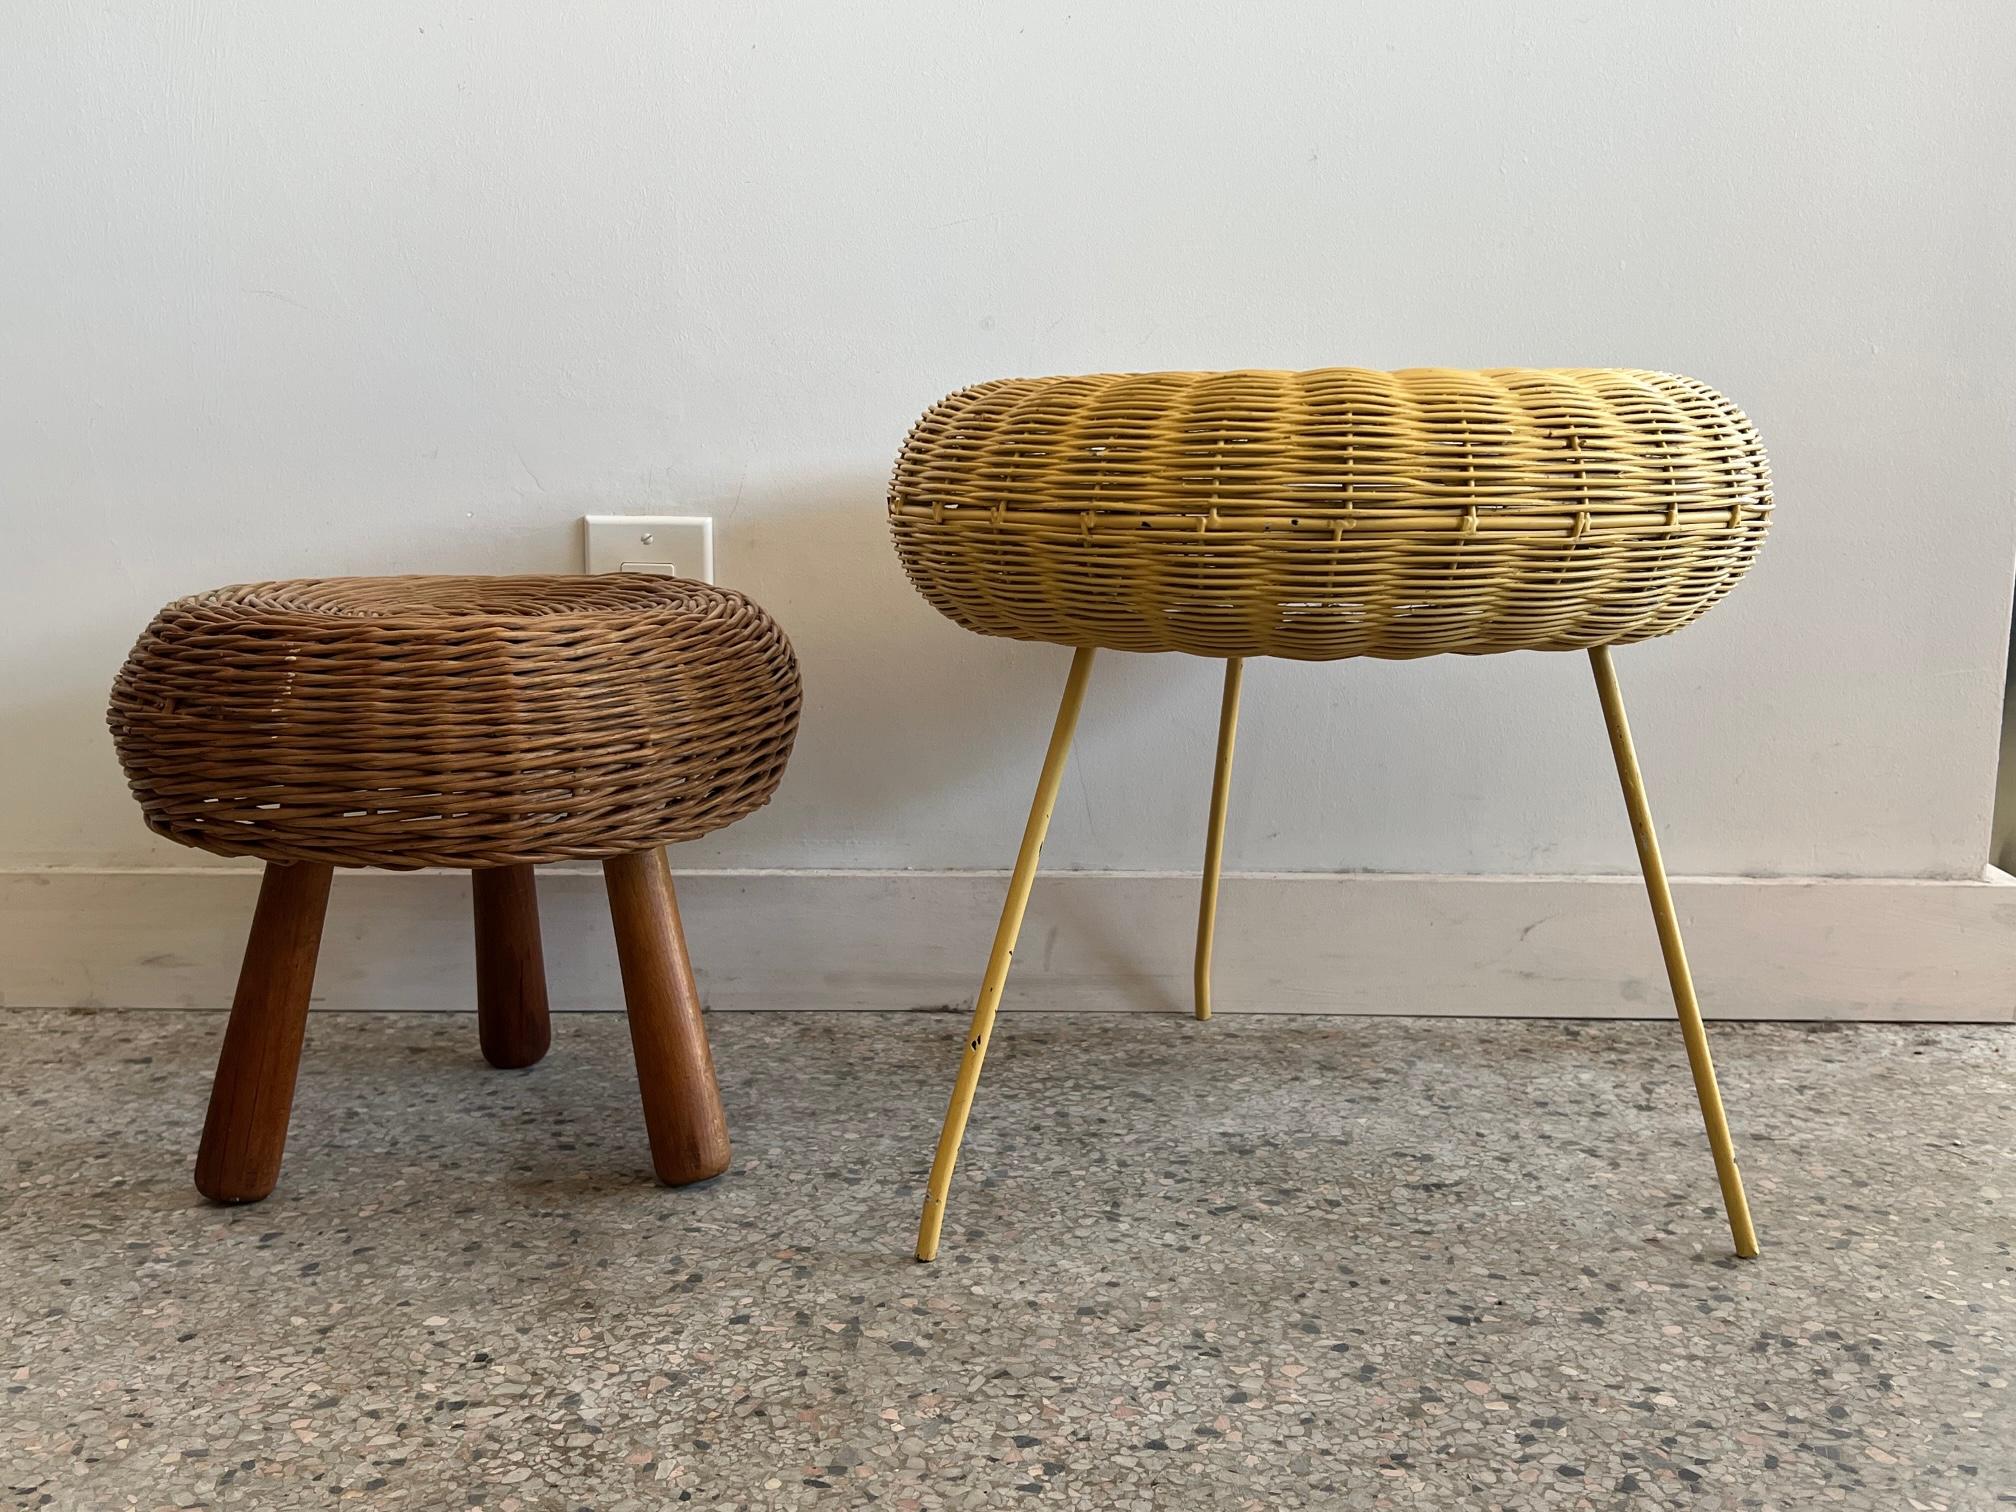 Two stools, in the style of Tony Paul, smaller with wood dowel legs and the larger with metal legs, yellow painted finish.
Larger measures 16